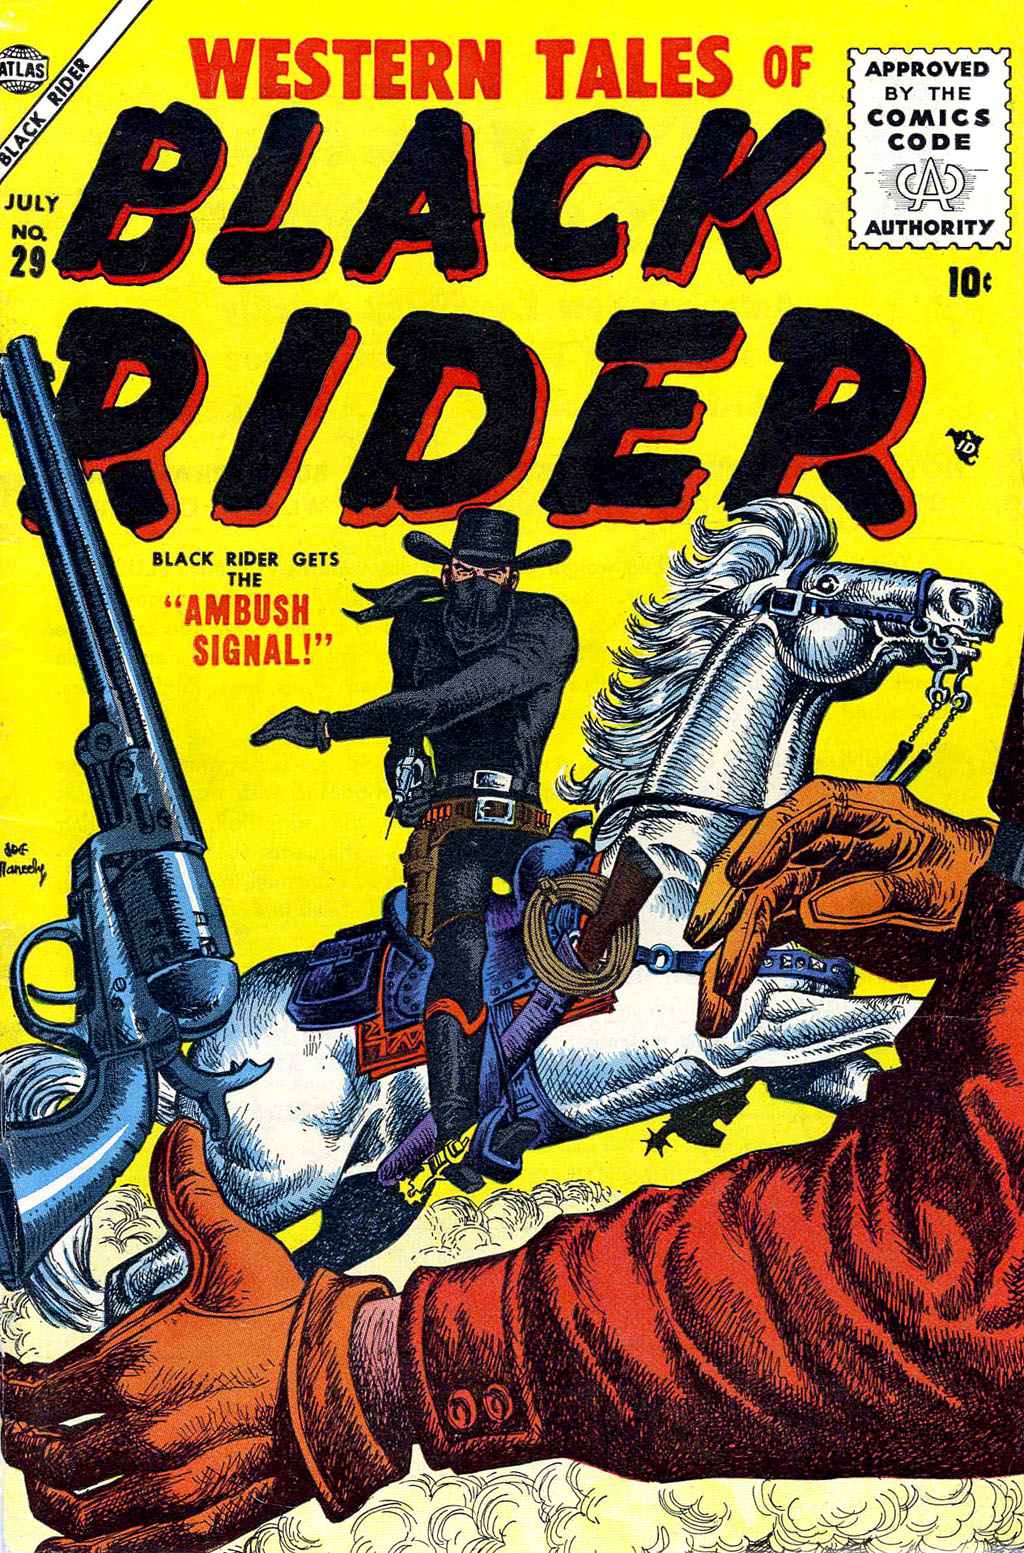 Read online Western Tales of Black Rider comic -  Issue #29 - 1